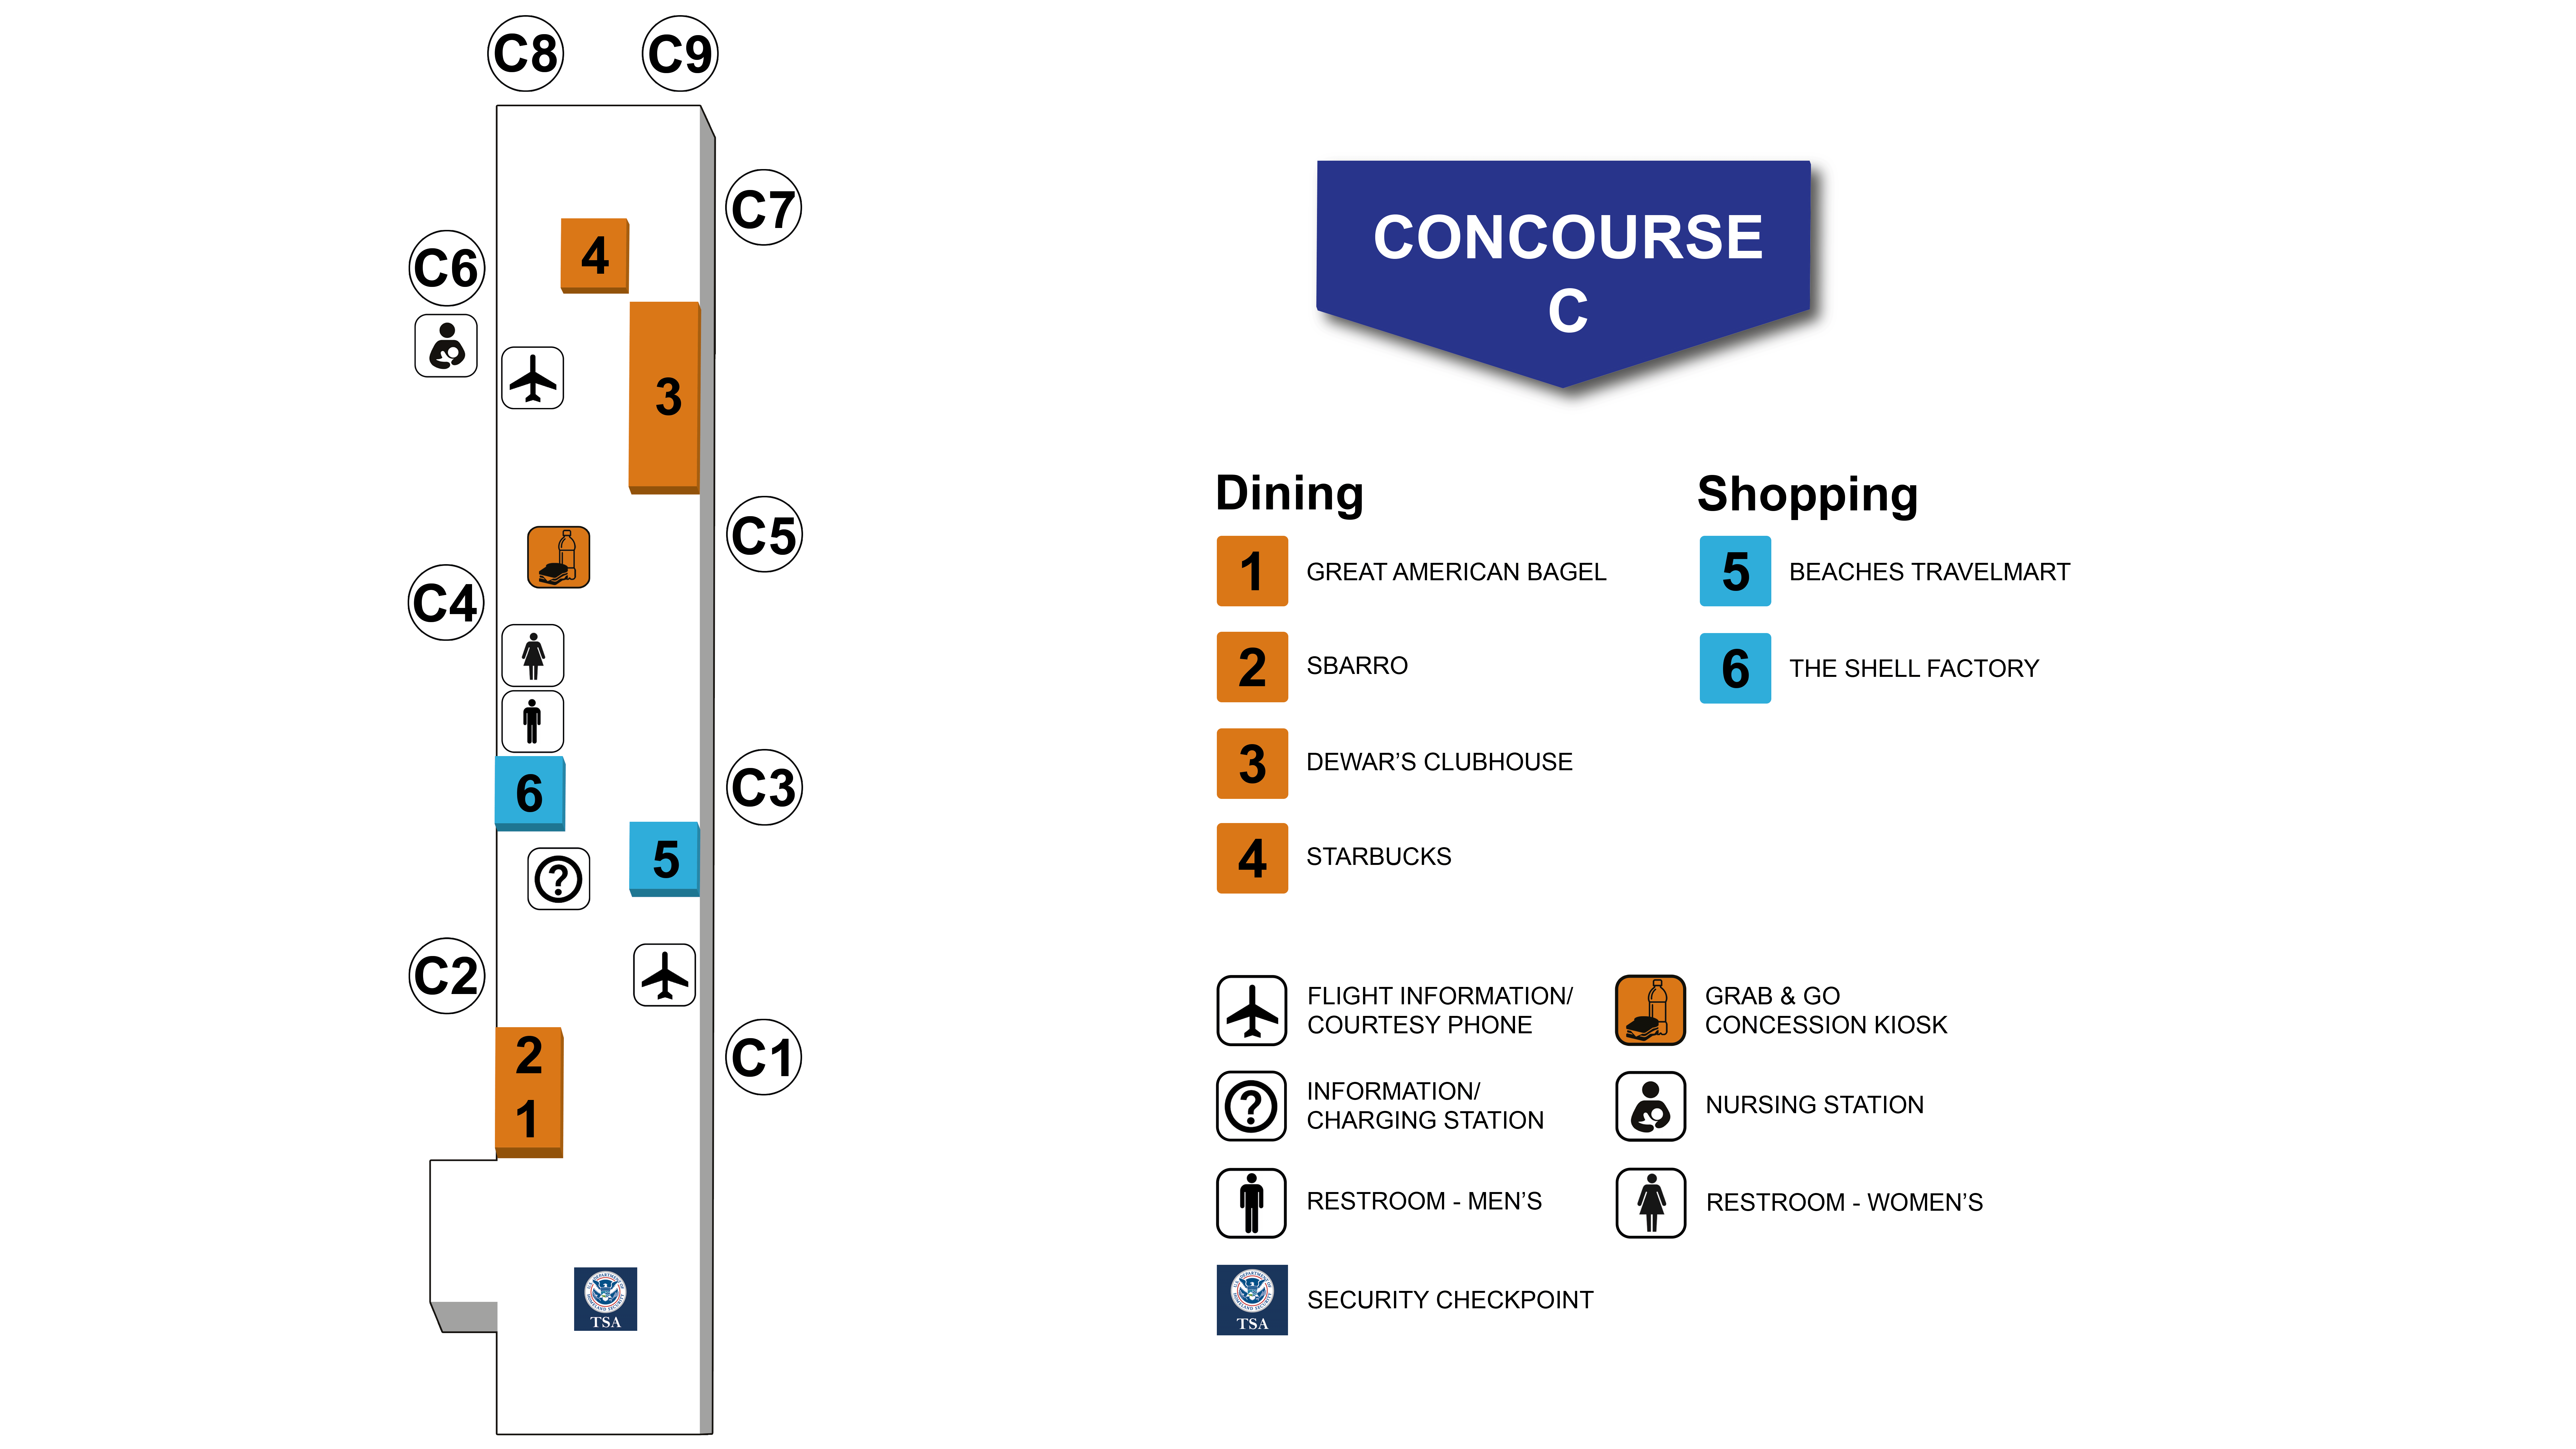 Southwest Florida International Airport Concourse C Map and Index